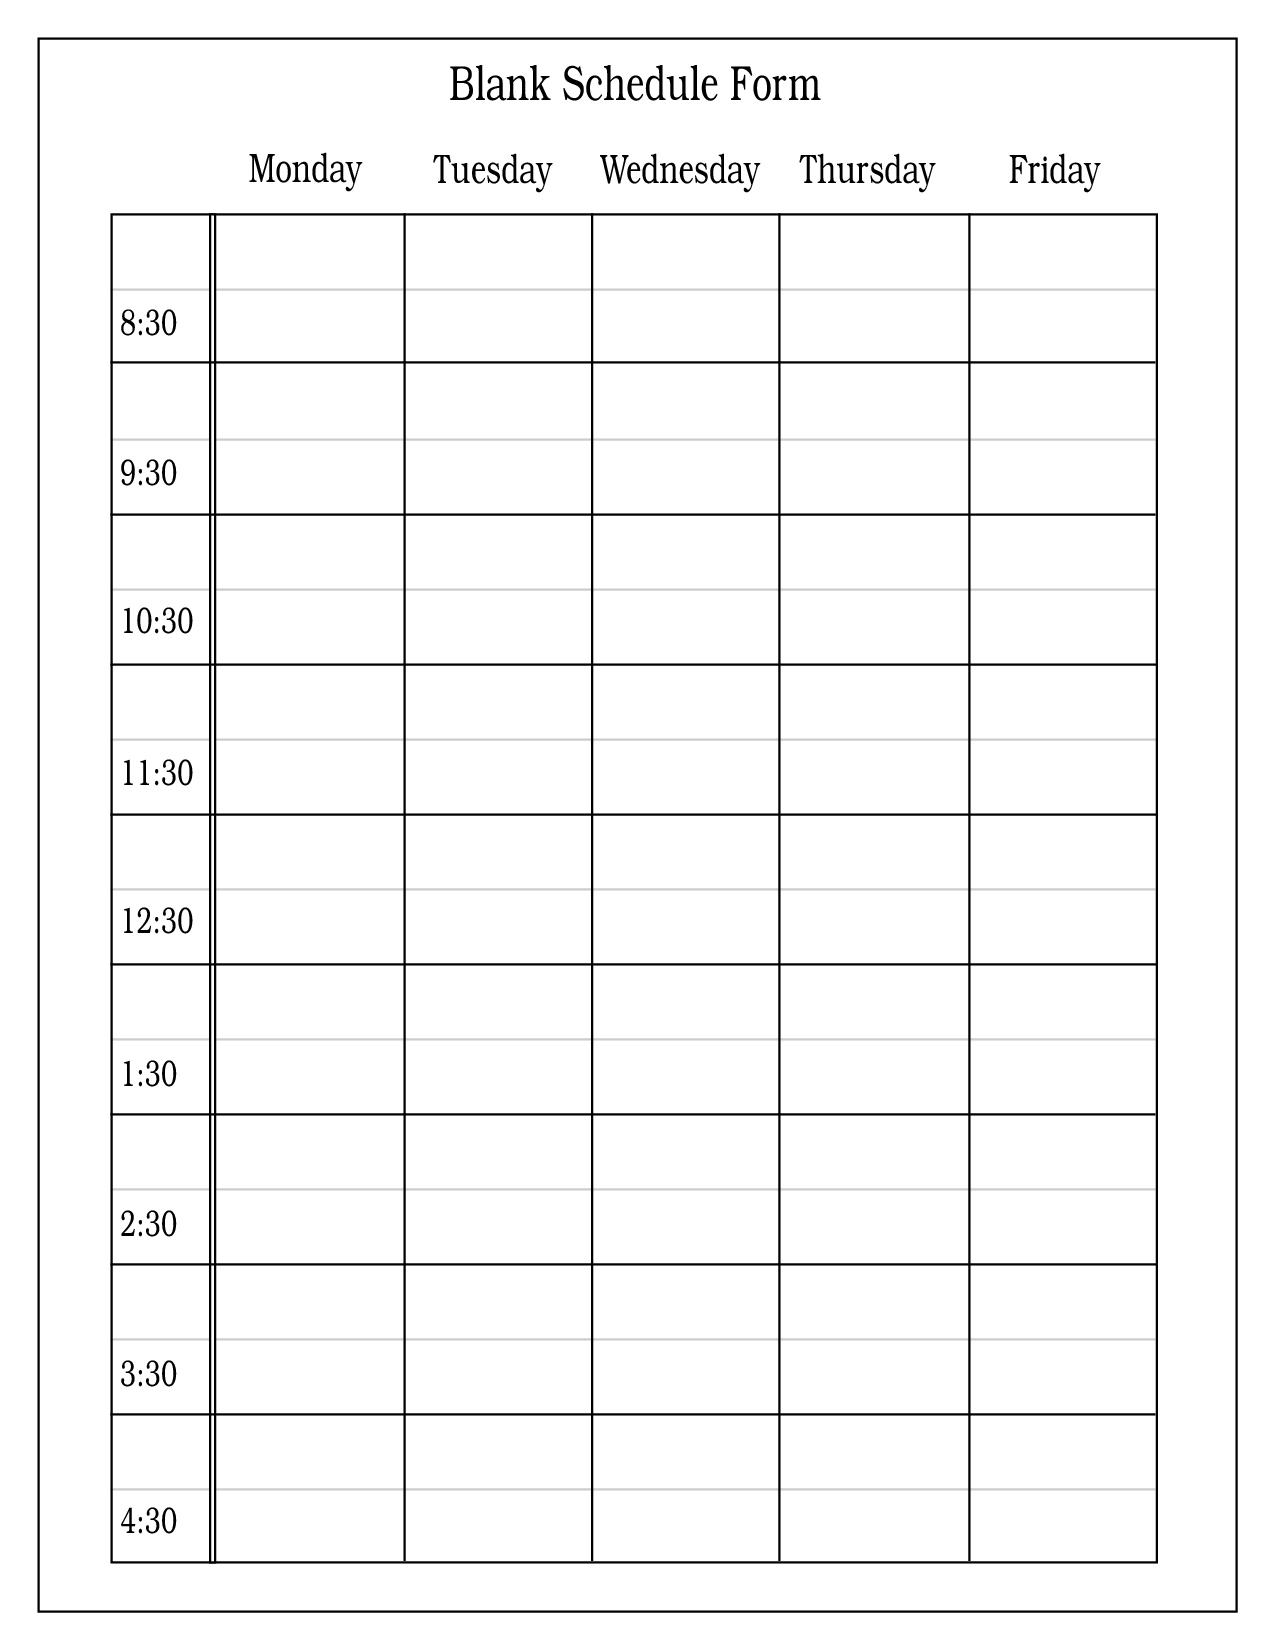 Employee Scheduling - Download A Free Employee Schedule Template For in Blank Schedule Sheet With Times